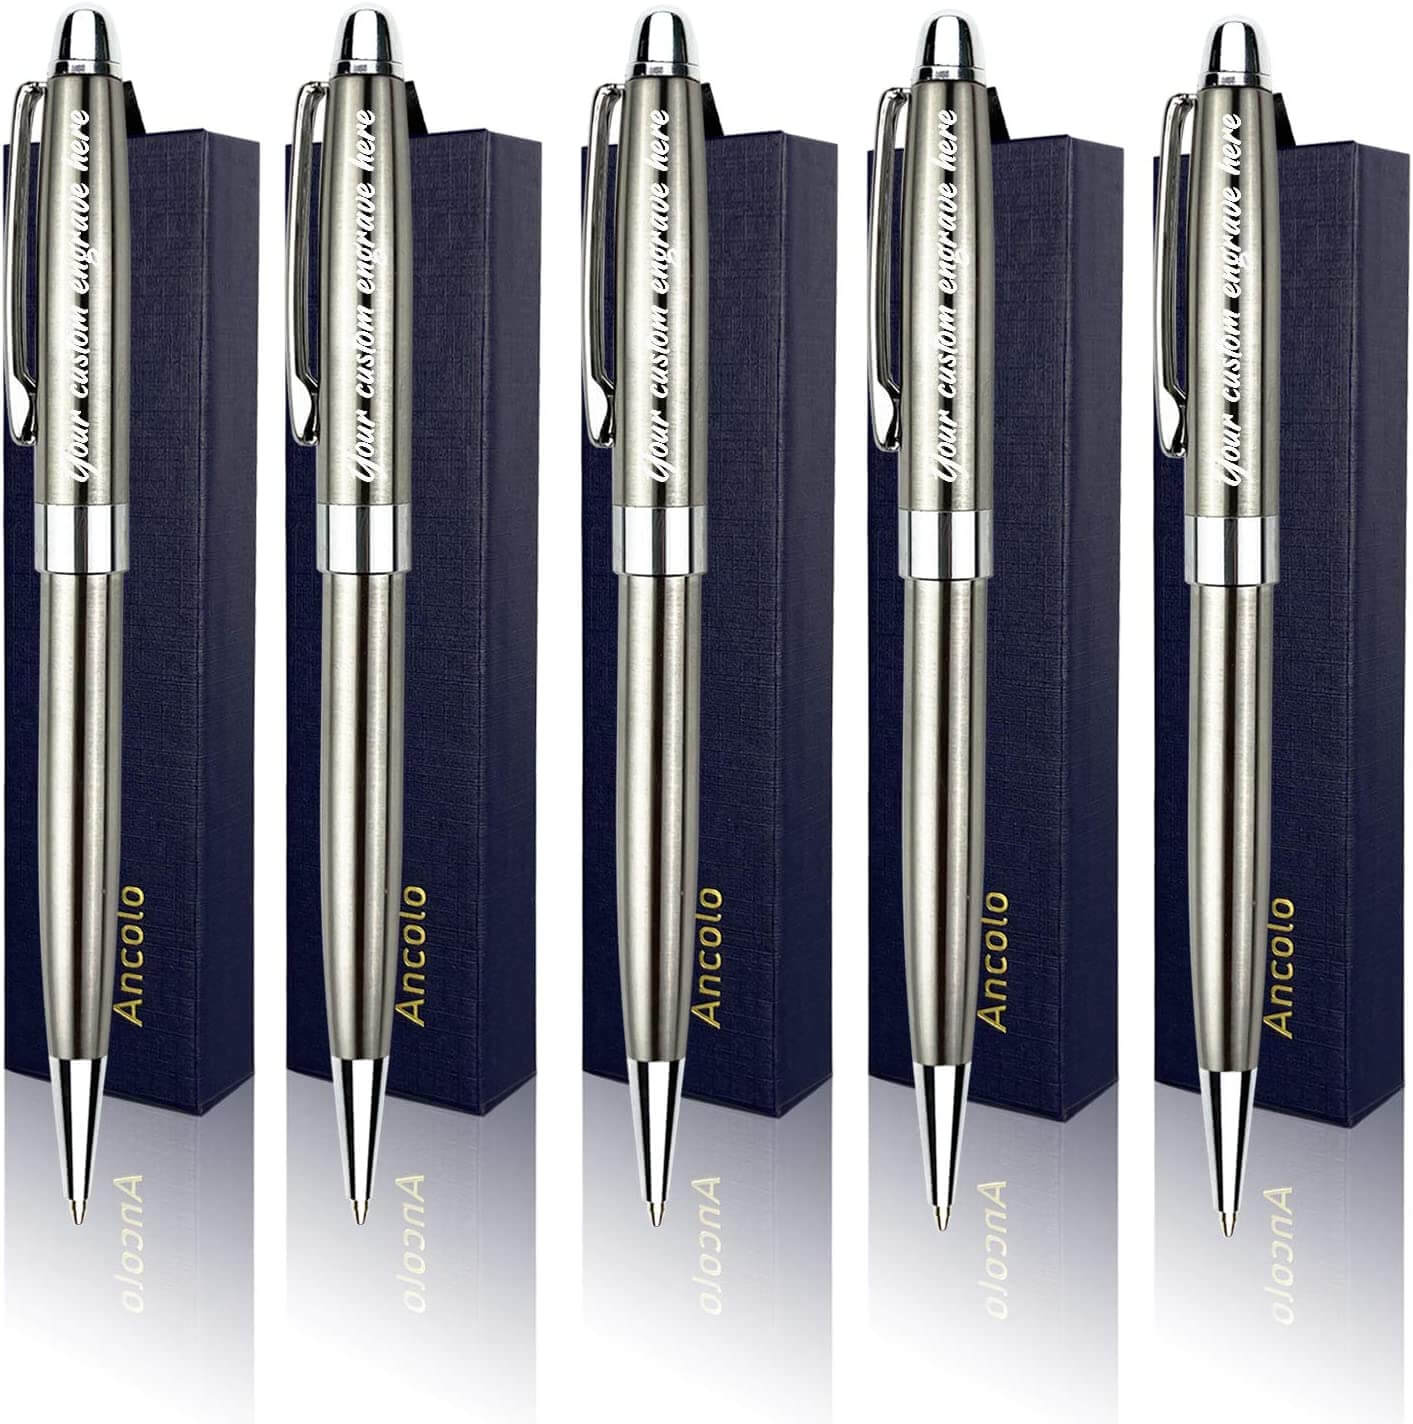 Jewel Fuel Swarovski Studded Silver Pen with Velvet Gift Box : Amazon.in:  Office Products